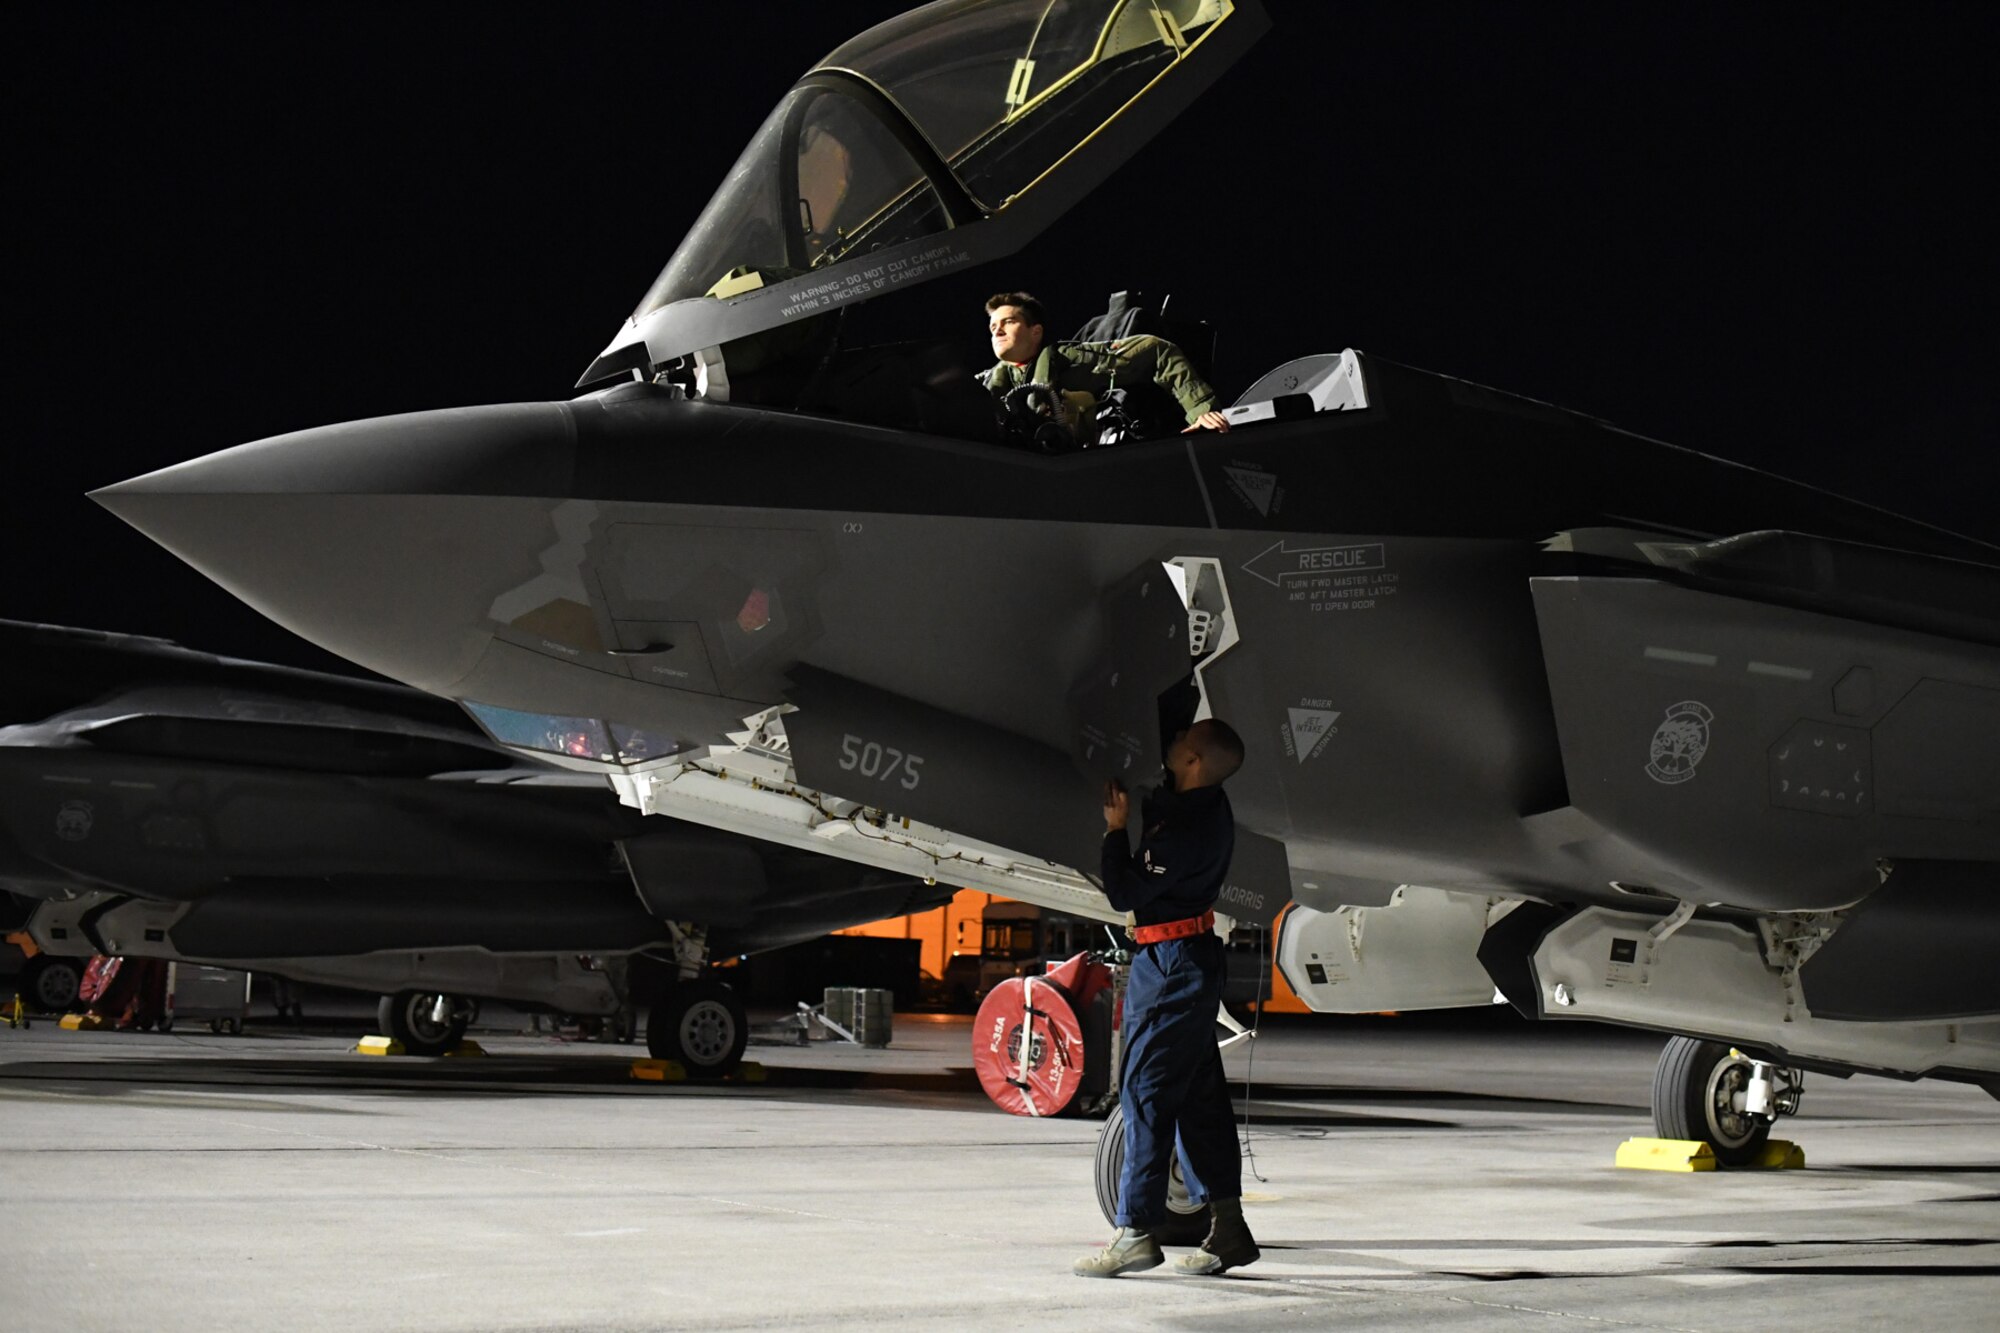 Lt. Col. Yosef Morris and Airman 1st class Raul Guzman, both 388th Fighter Wing, Hill Air Force Base, Utah, prepare for a sortie Feb. 3 at Nellis Air Force Base, Nevada, during Red Flag 17-1. (U.S. Air Force photo by R. Nial Bradshaw)